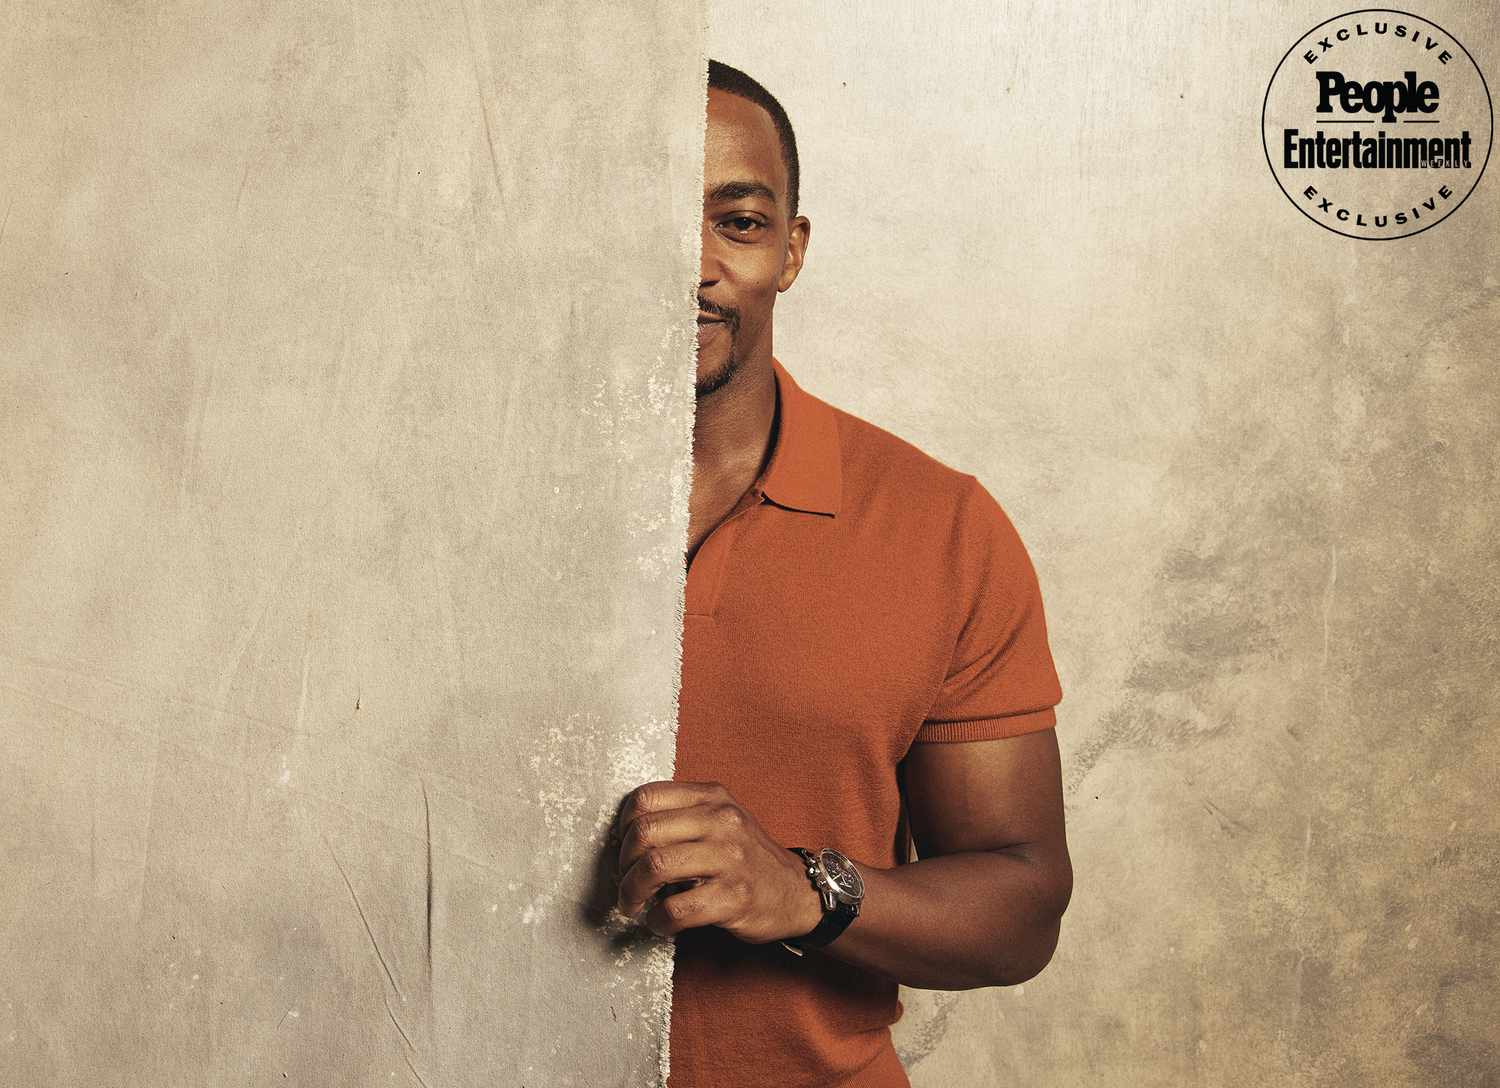 Anthony Mackie (If You Were the Last)